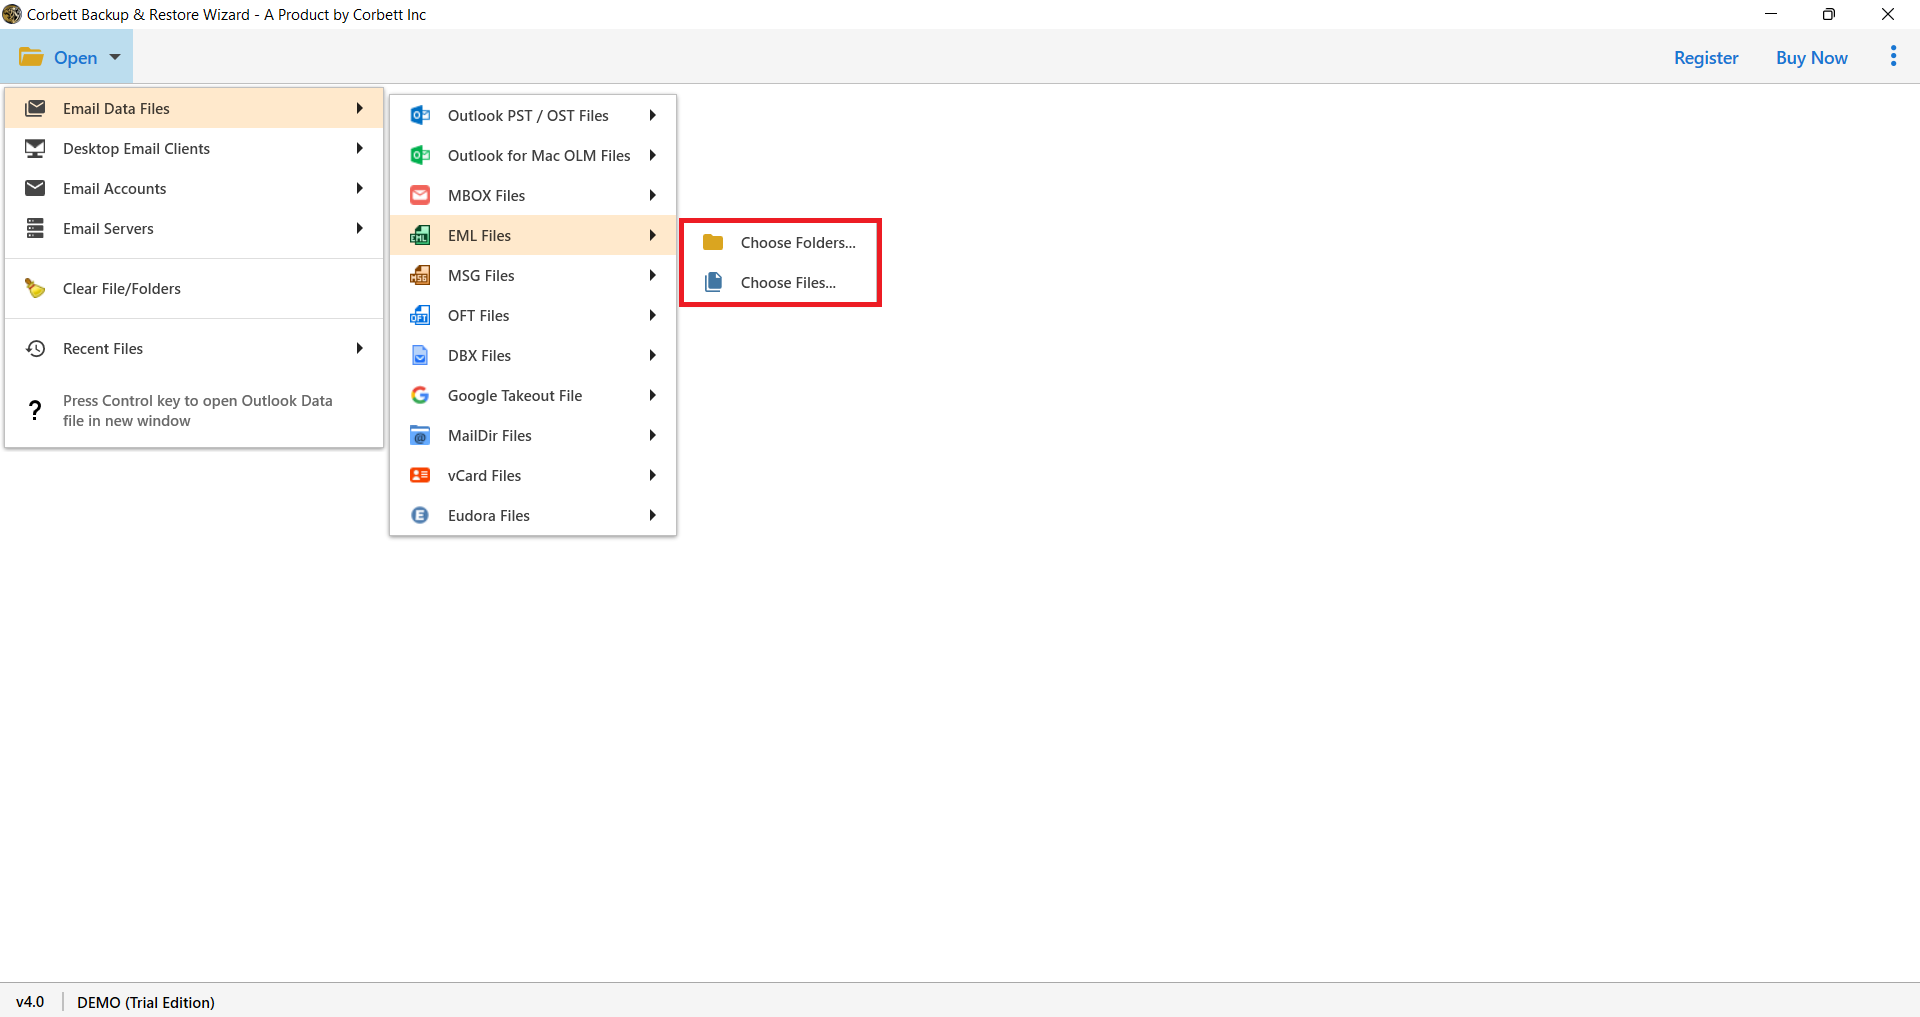 select EML Files and then choose files and folders